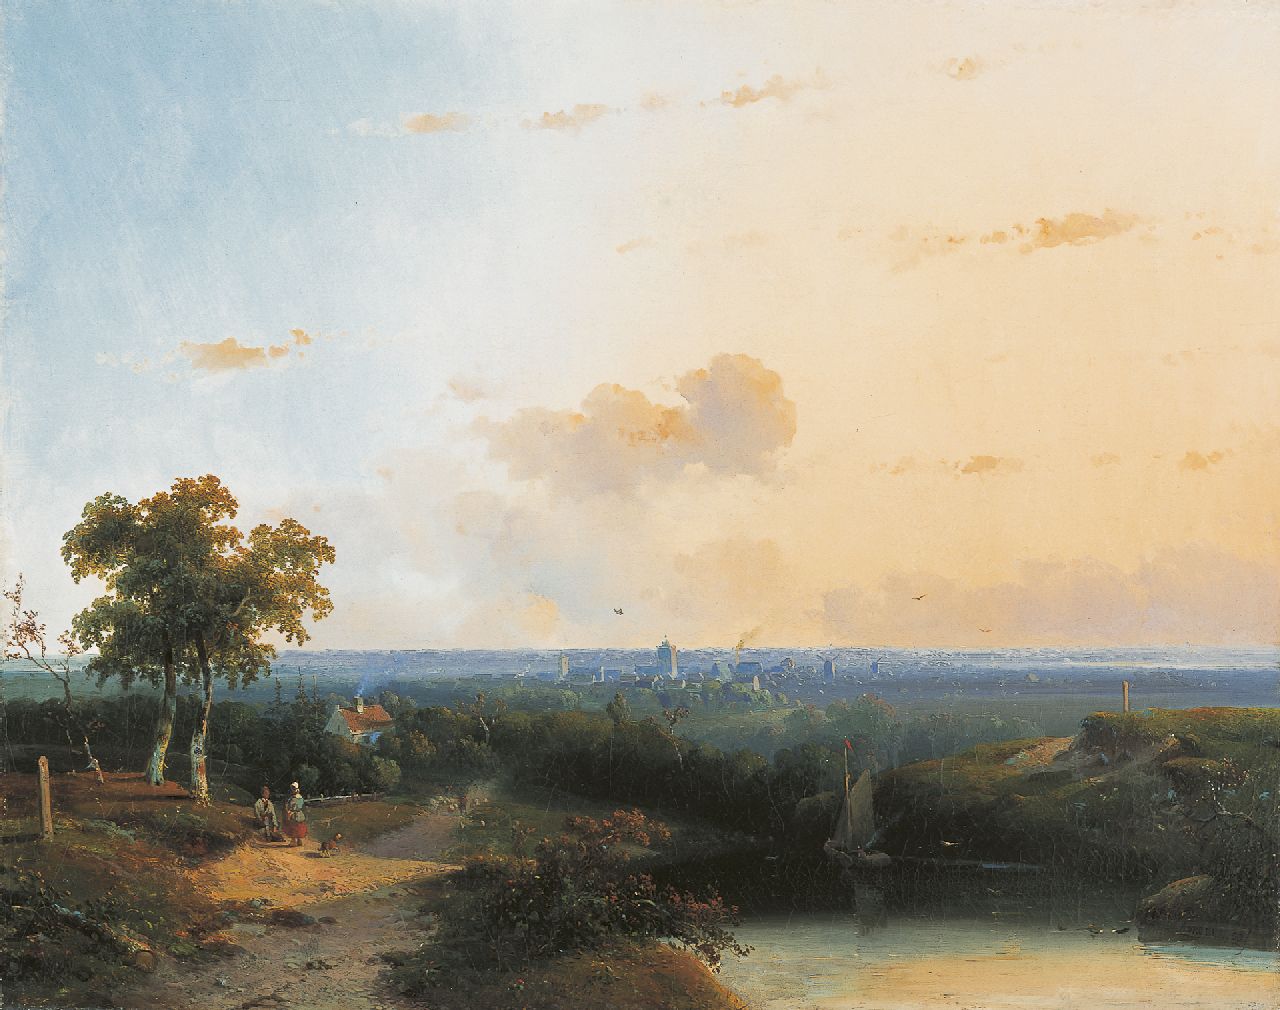 Vrolijk J.A.  | Jacobus 'Adriaan' Vrolijk, Panoramic summer landscape with pedestrians by a lake, oil on canvas 50.5 x 63.0 cm, signed l.r. and dated '53